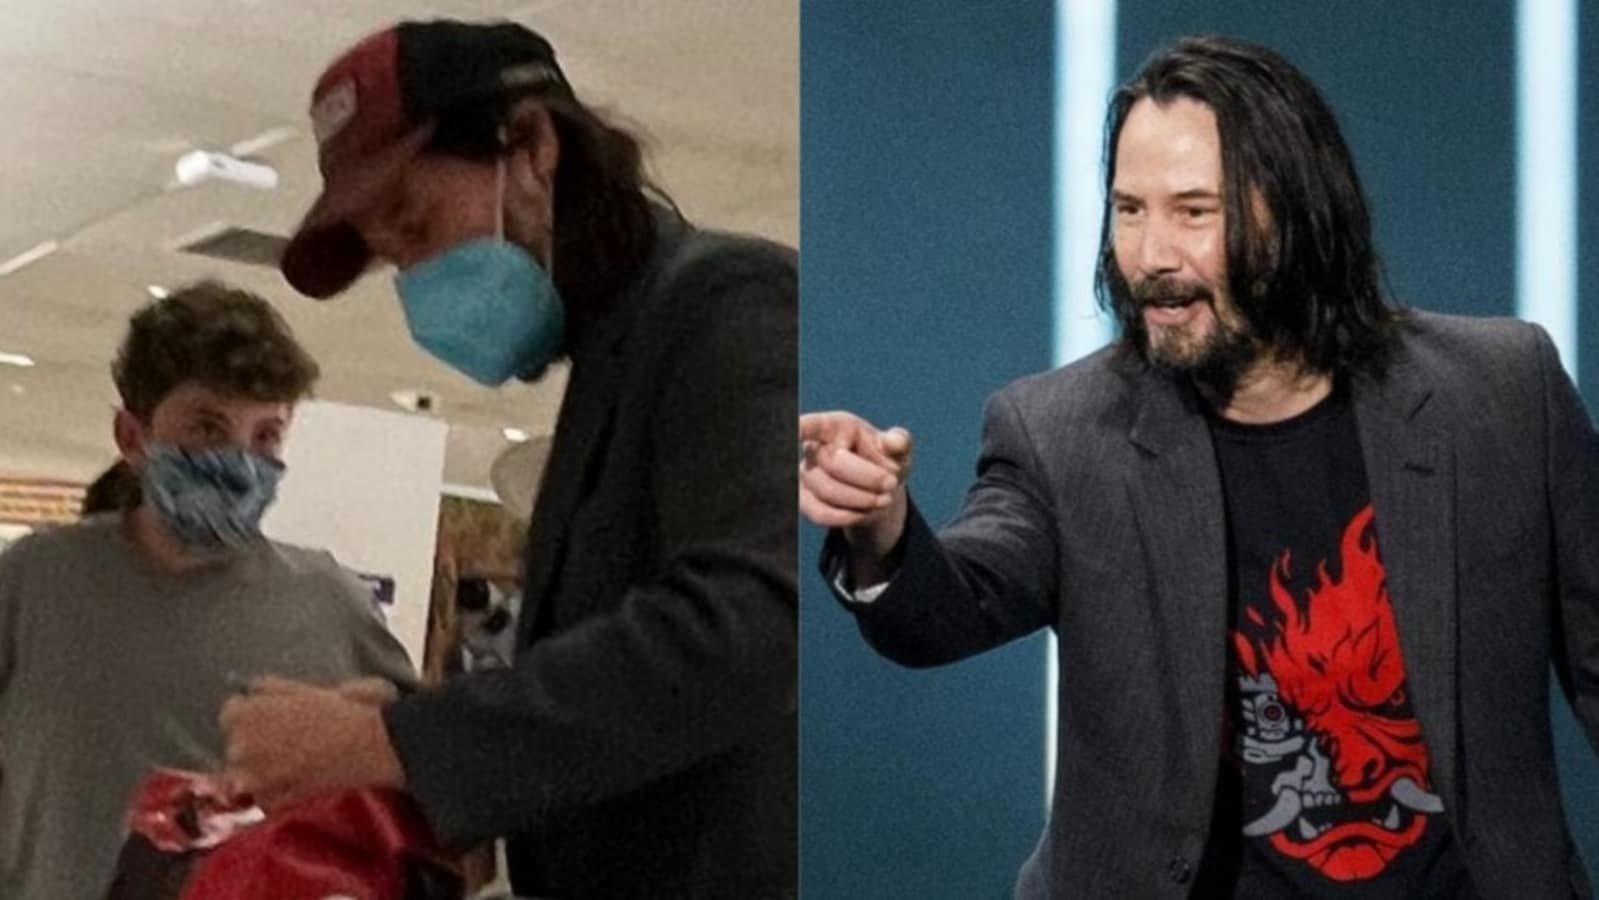 Keanu Reeves ‘fortunately responds’ to fan’s rapid-fire questions at New York airport, Twitter calls him perfect human being